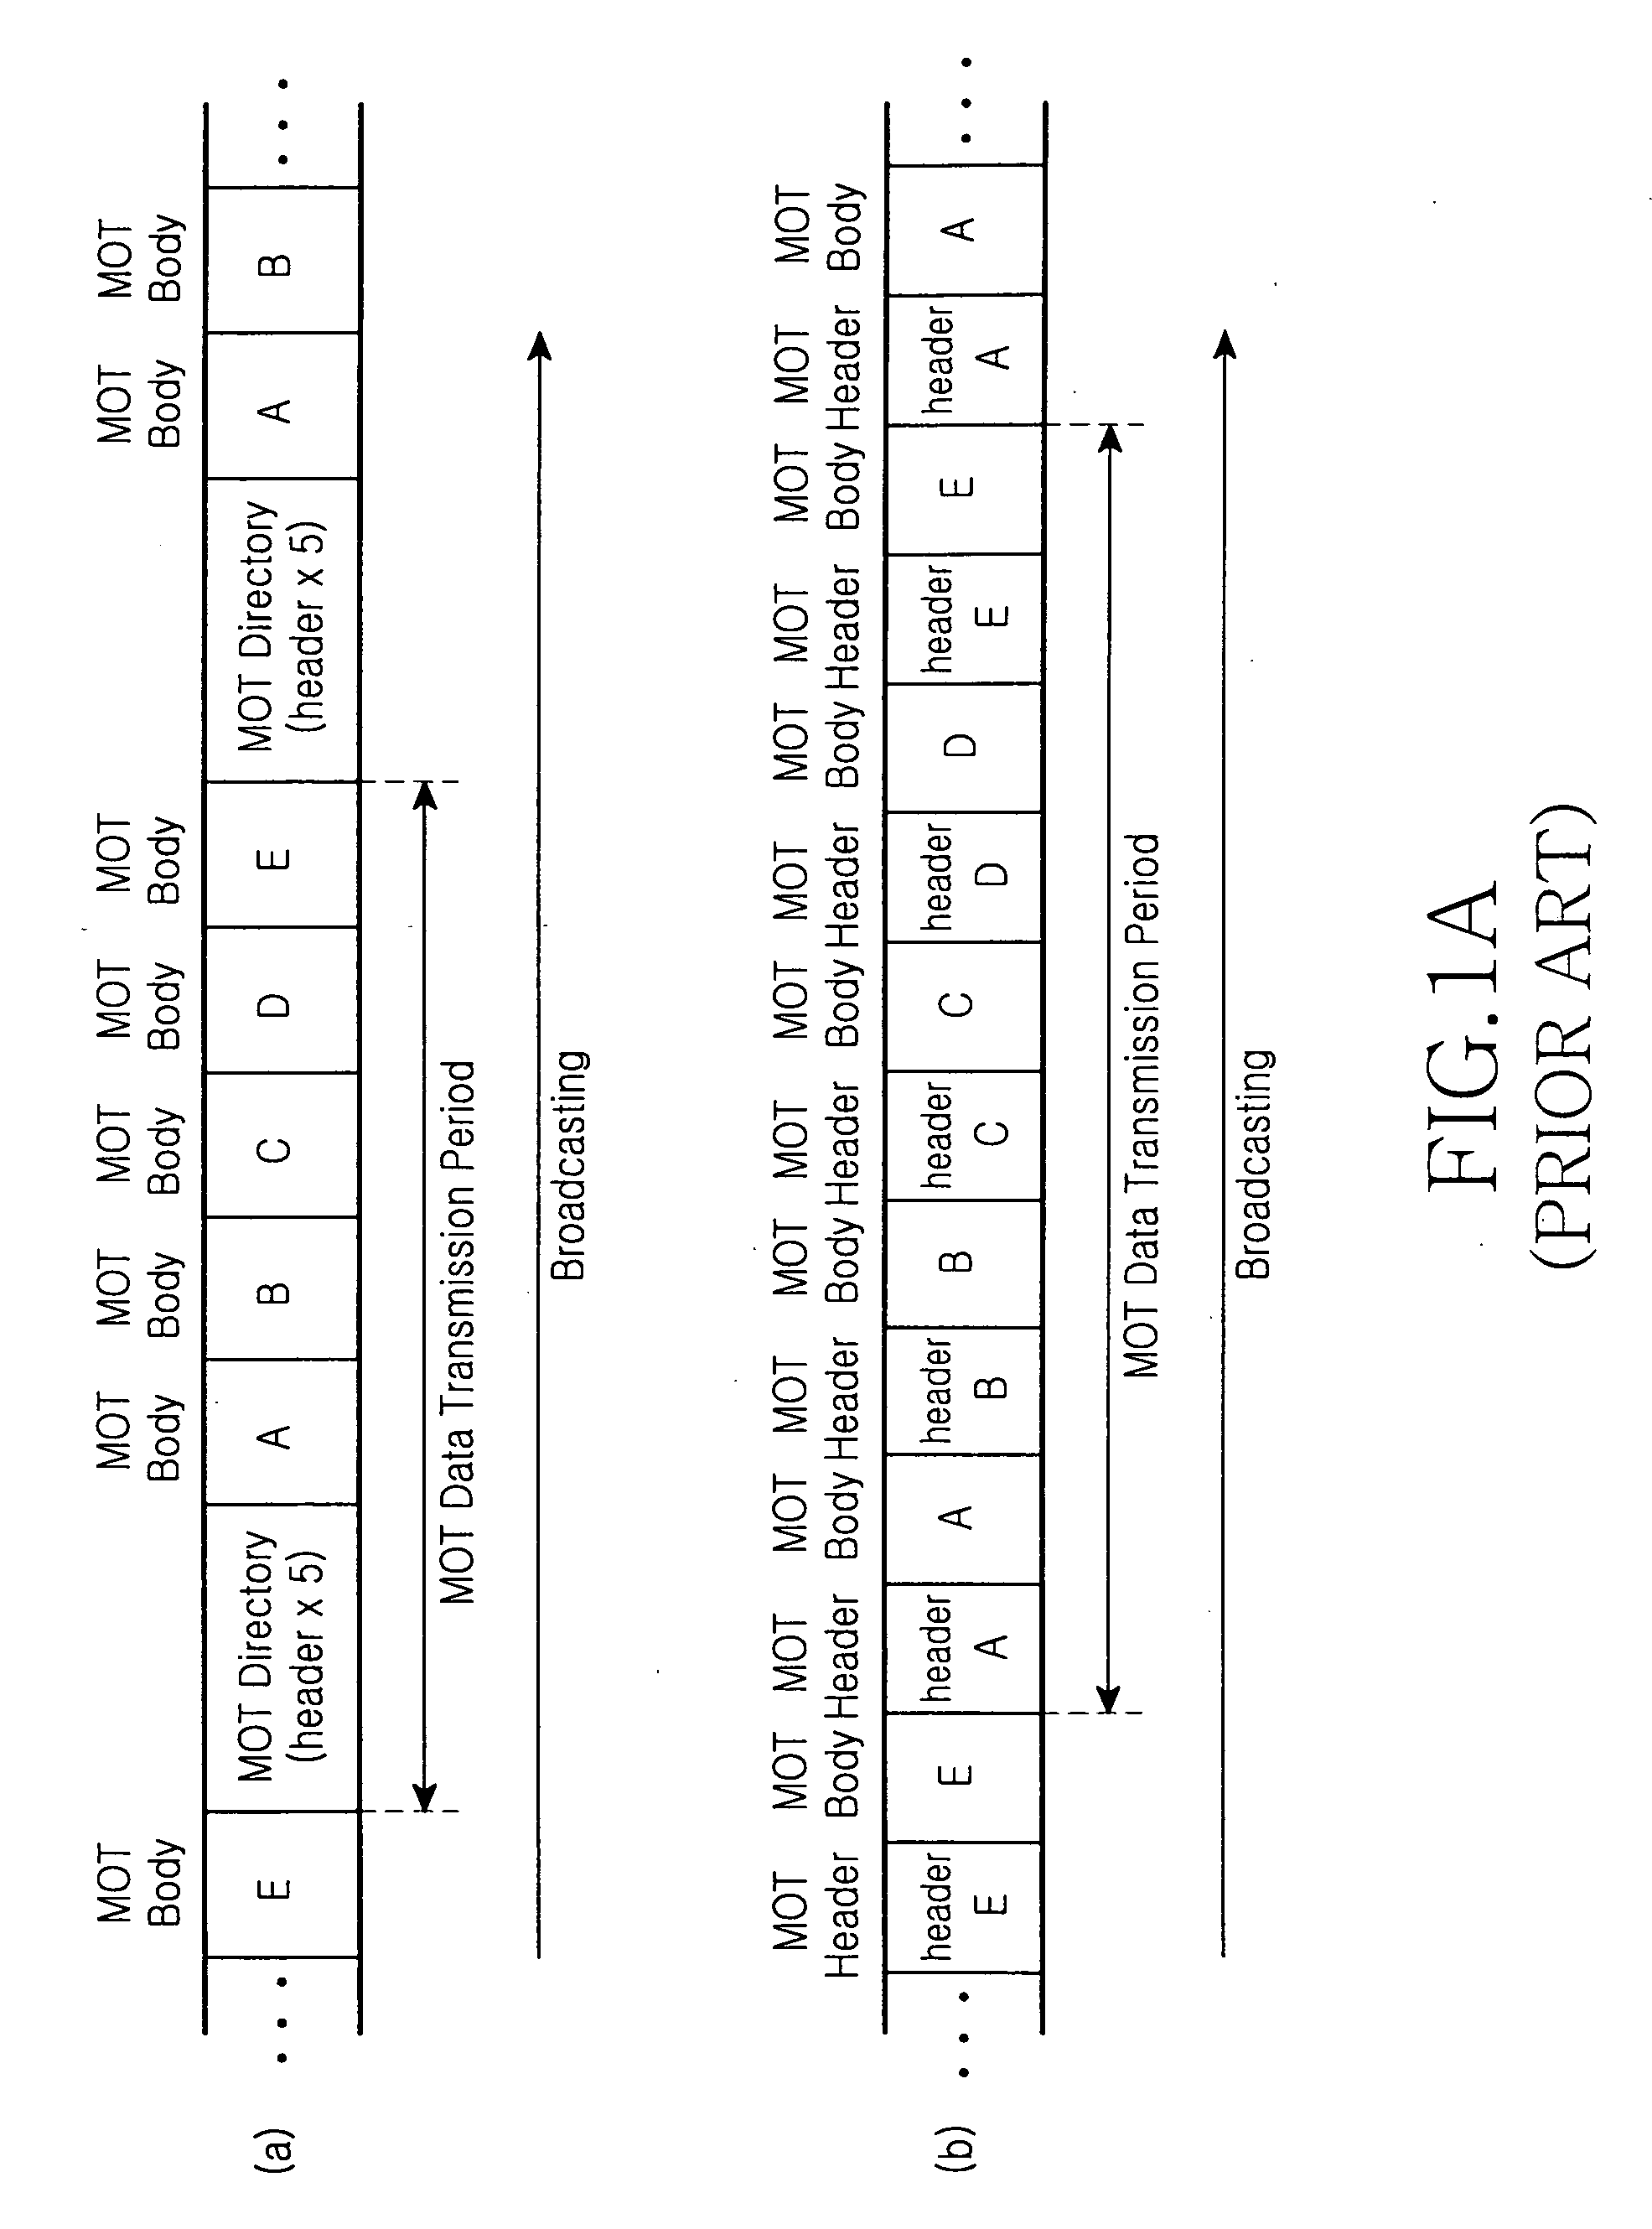 DMB data receiving apparatus and method for improving DMB data receiving speed